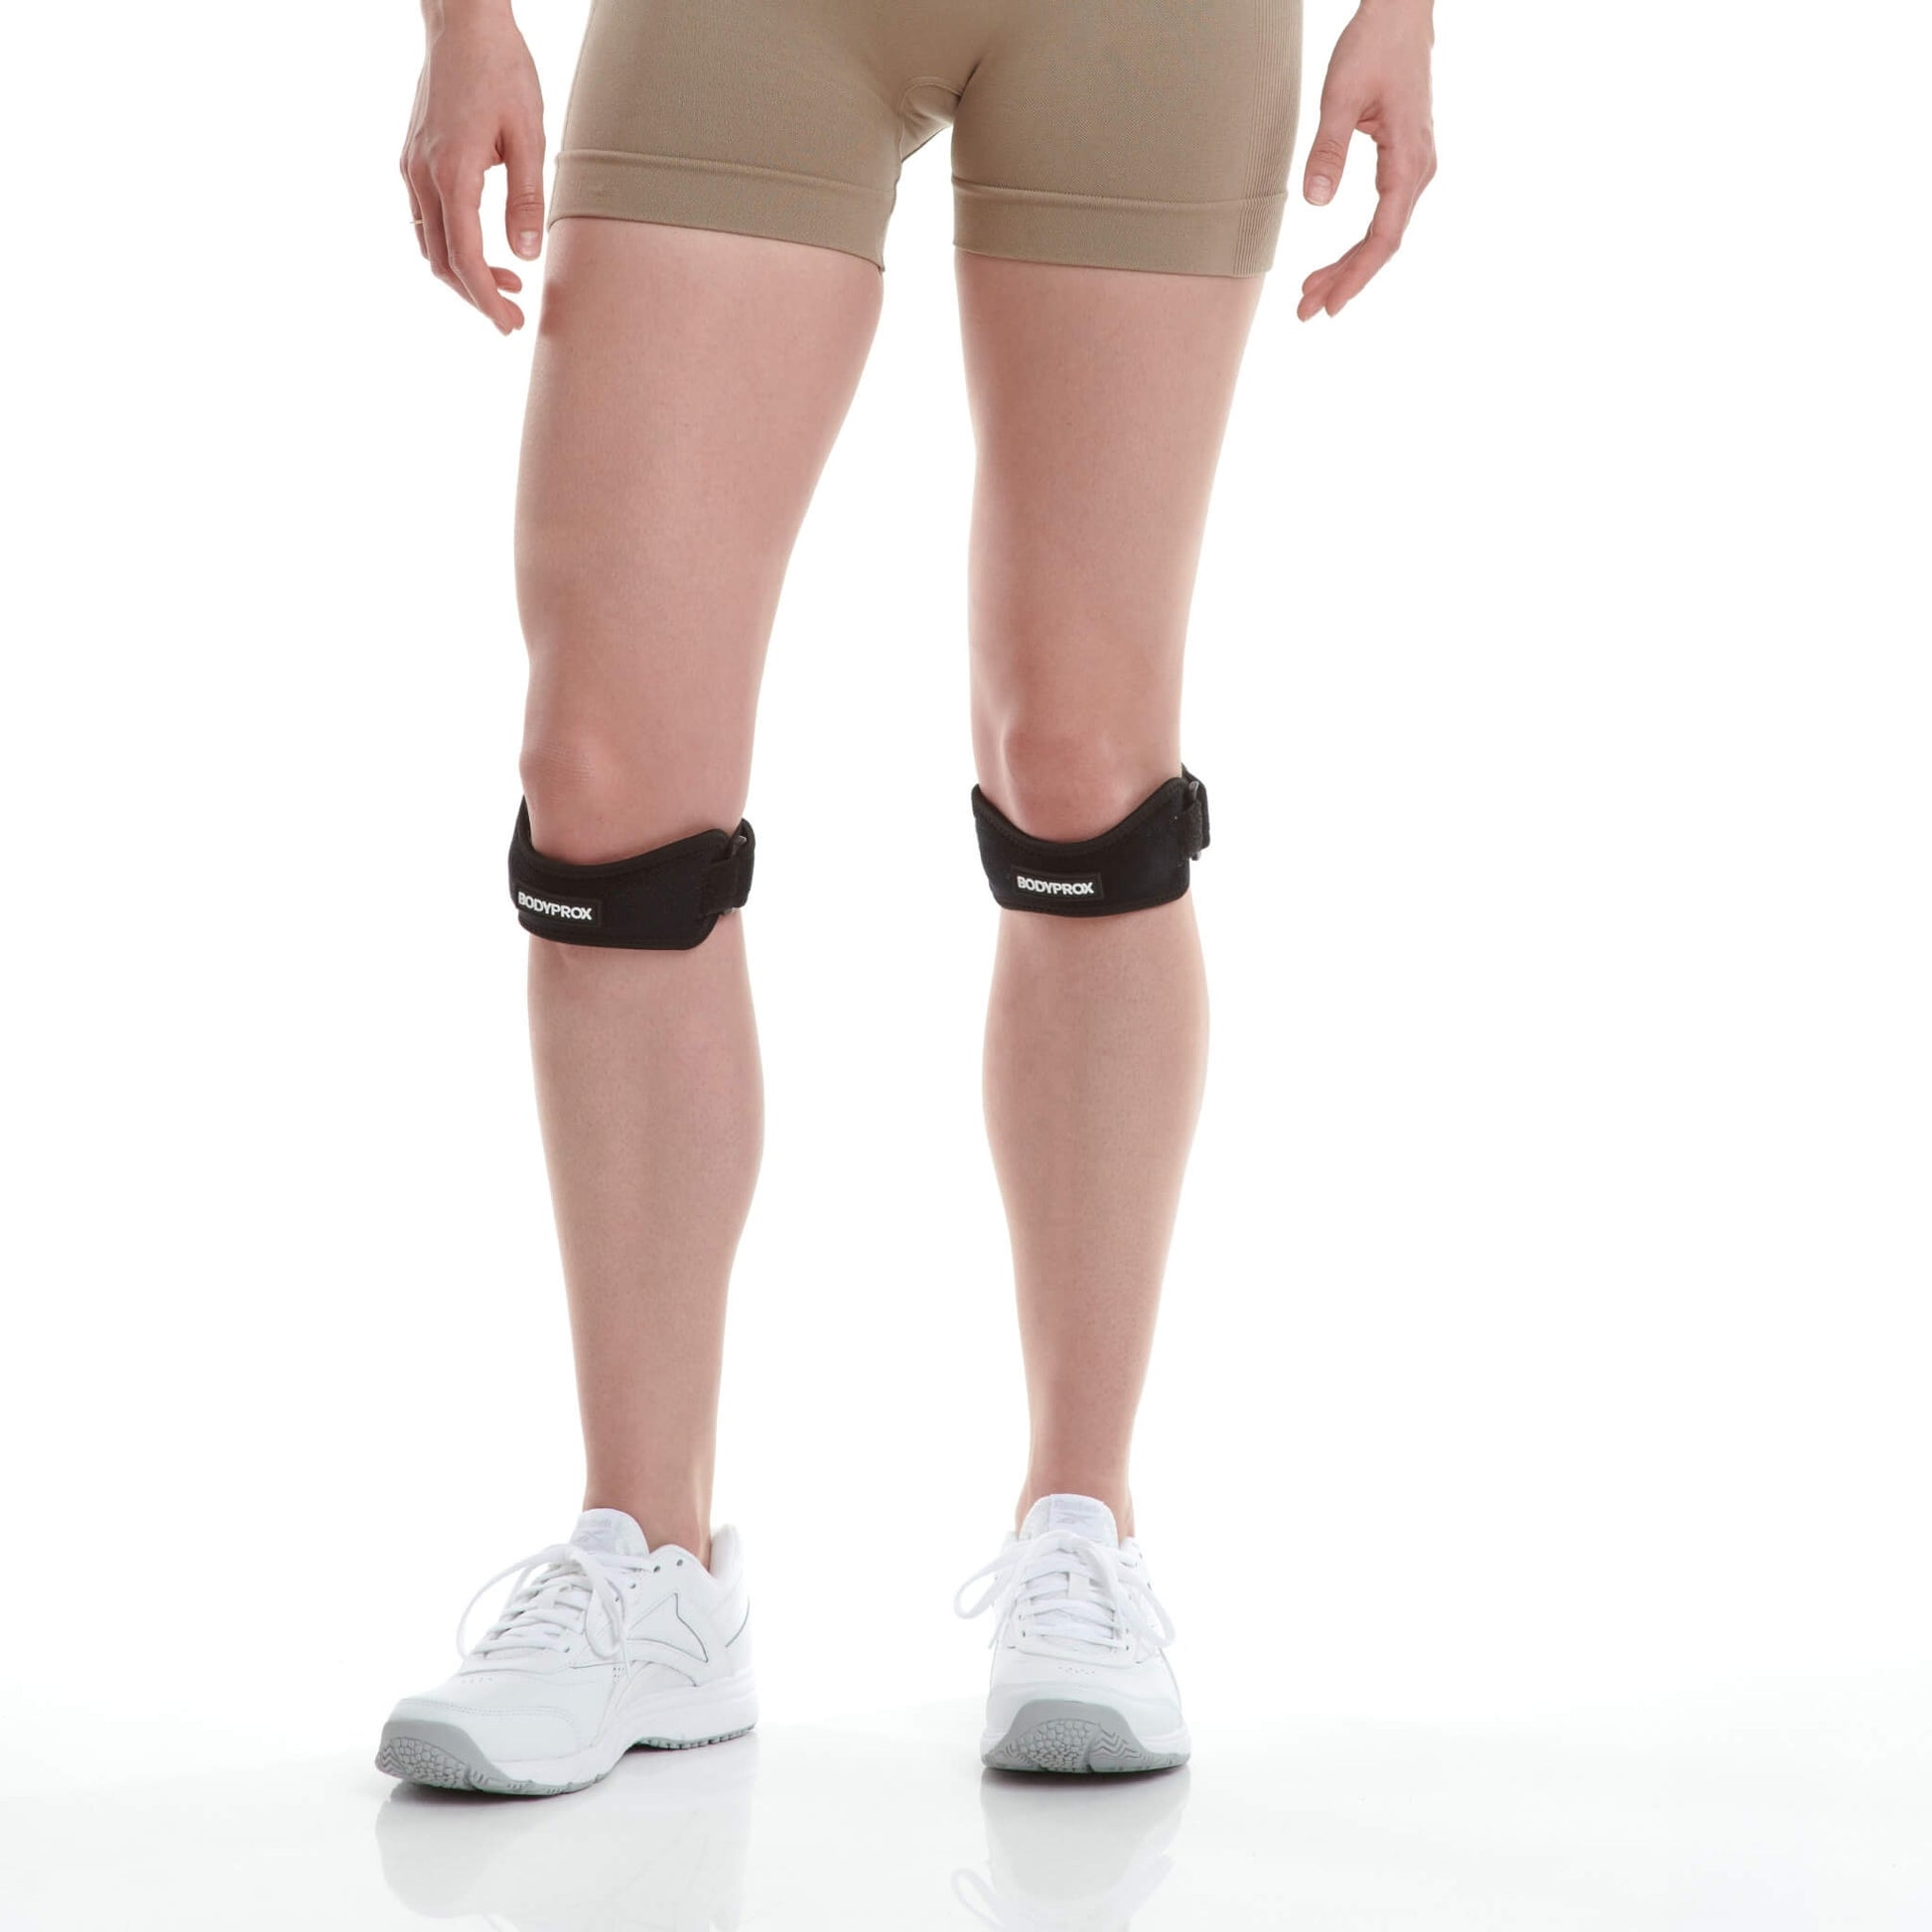 Basic Knee Support Open Patella Brace with Straps